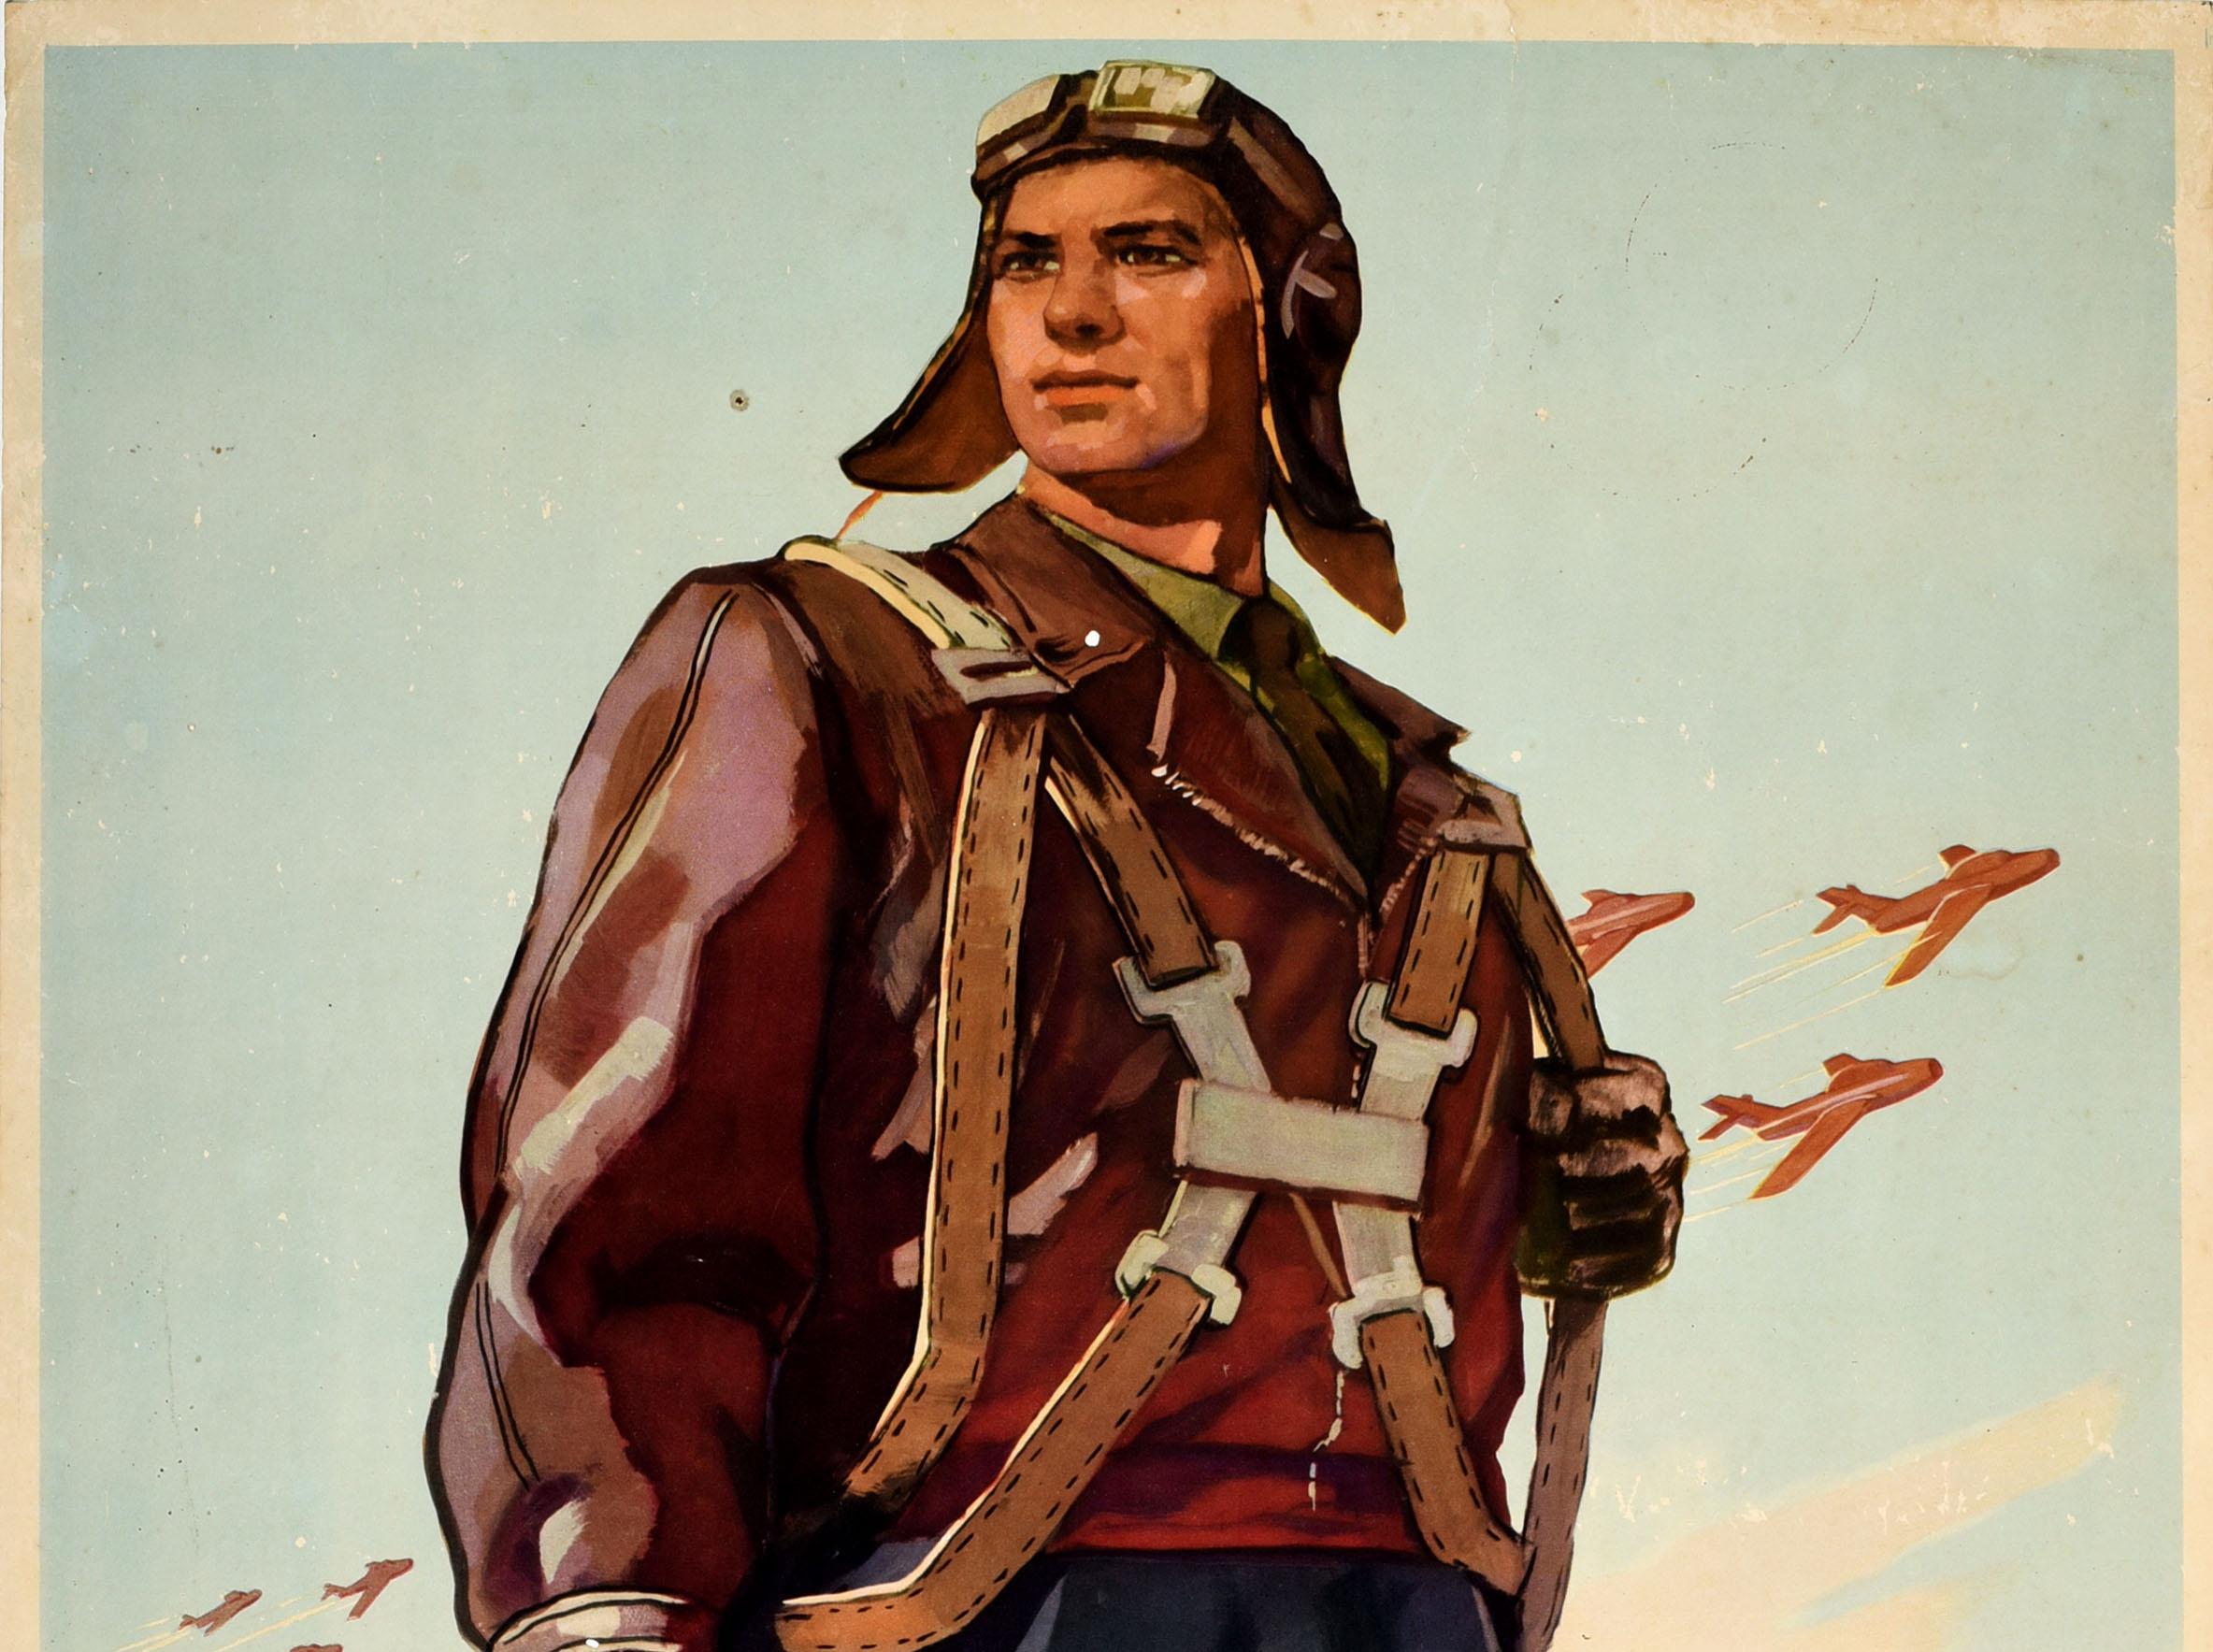 Original vintage Soviet propaganda poster - Glory to the Winged Heroes! / ????? ???????? ?????????! Dynamic artwork by Igor Aleksandrovich Kominarets (b 1923) depicting a pilot in uniform standing in front of fighter jets and other planes flying